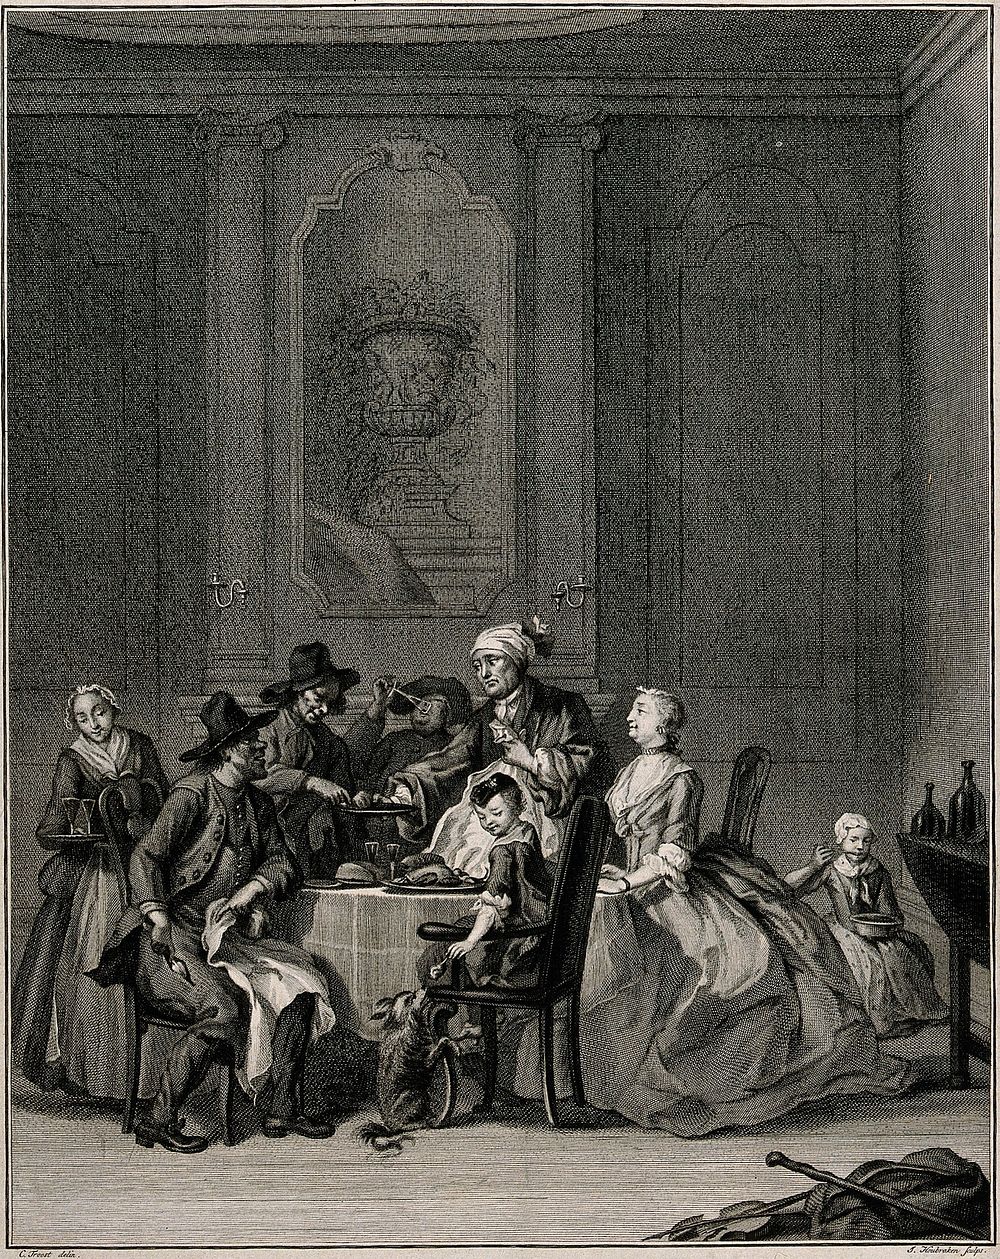 People having a meal with a woman presiding over the table. Engraving by J. Houbraken after C. Troost.